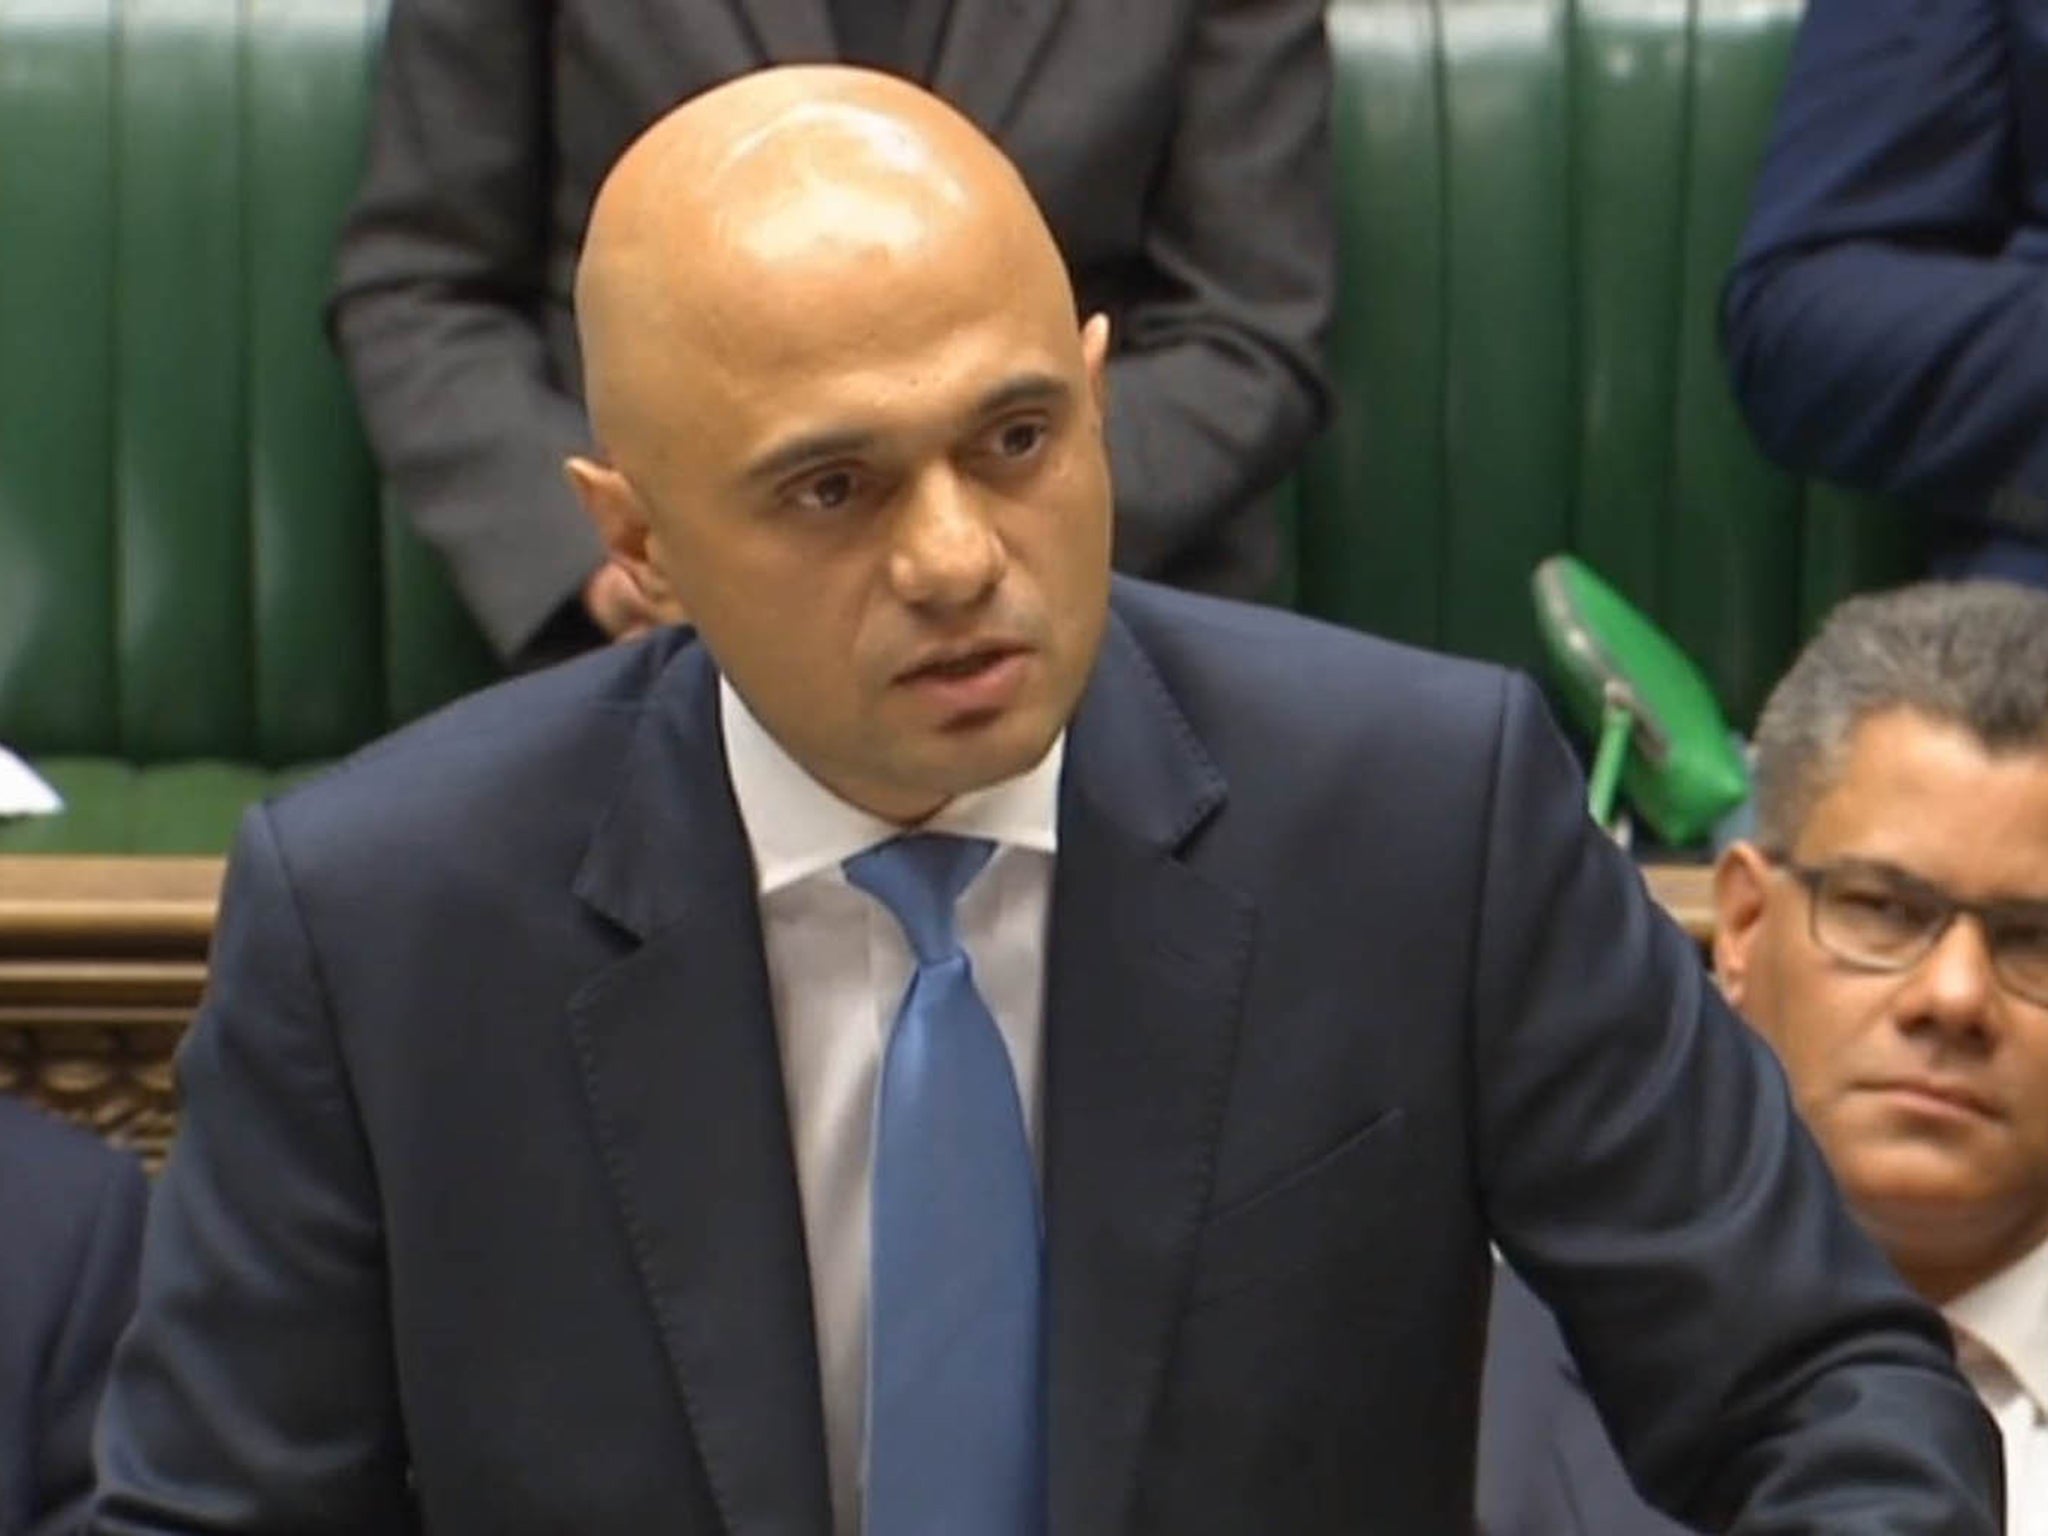 Sajid Javid is said to have told MPs he had listened to calls to look again at housing benefit plans